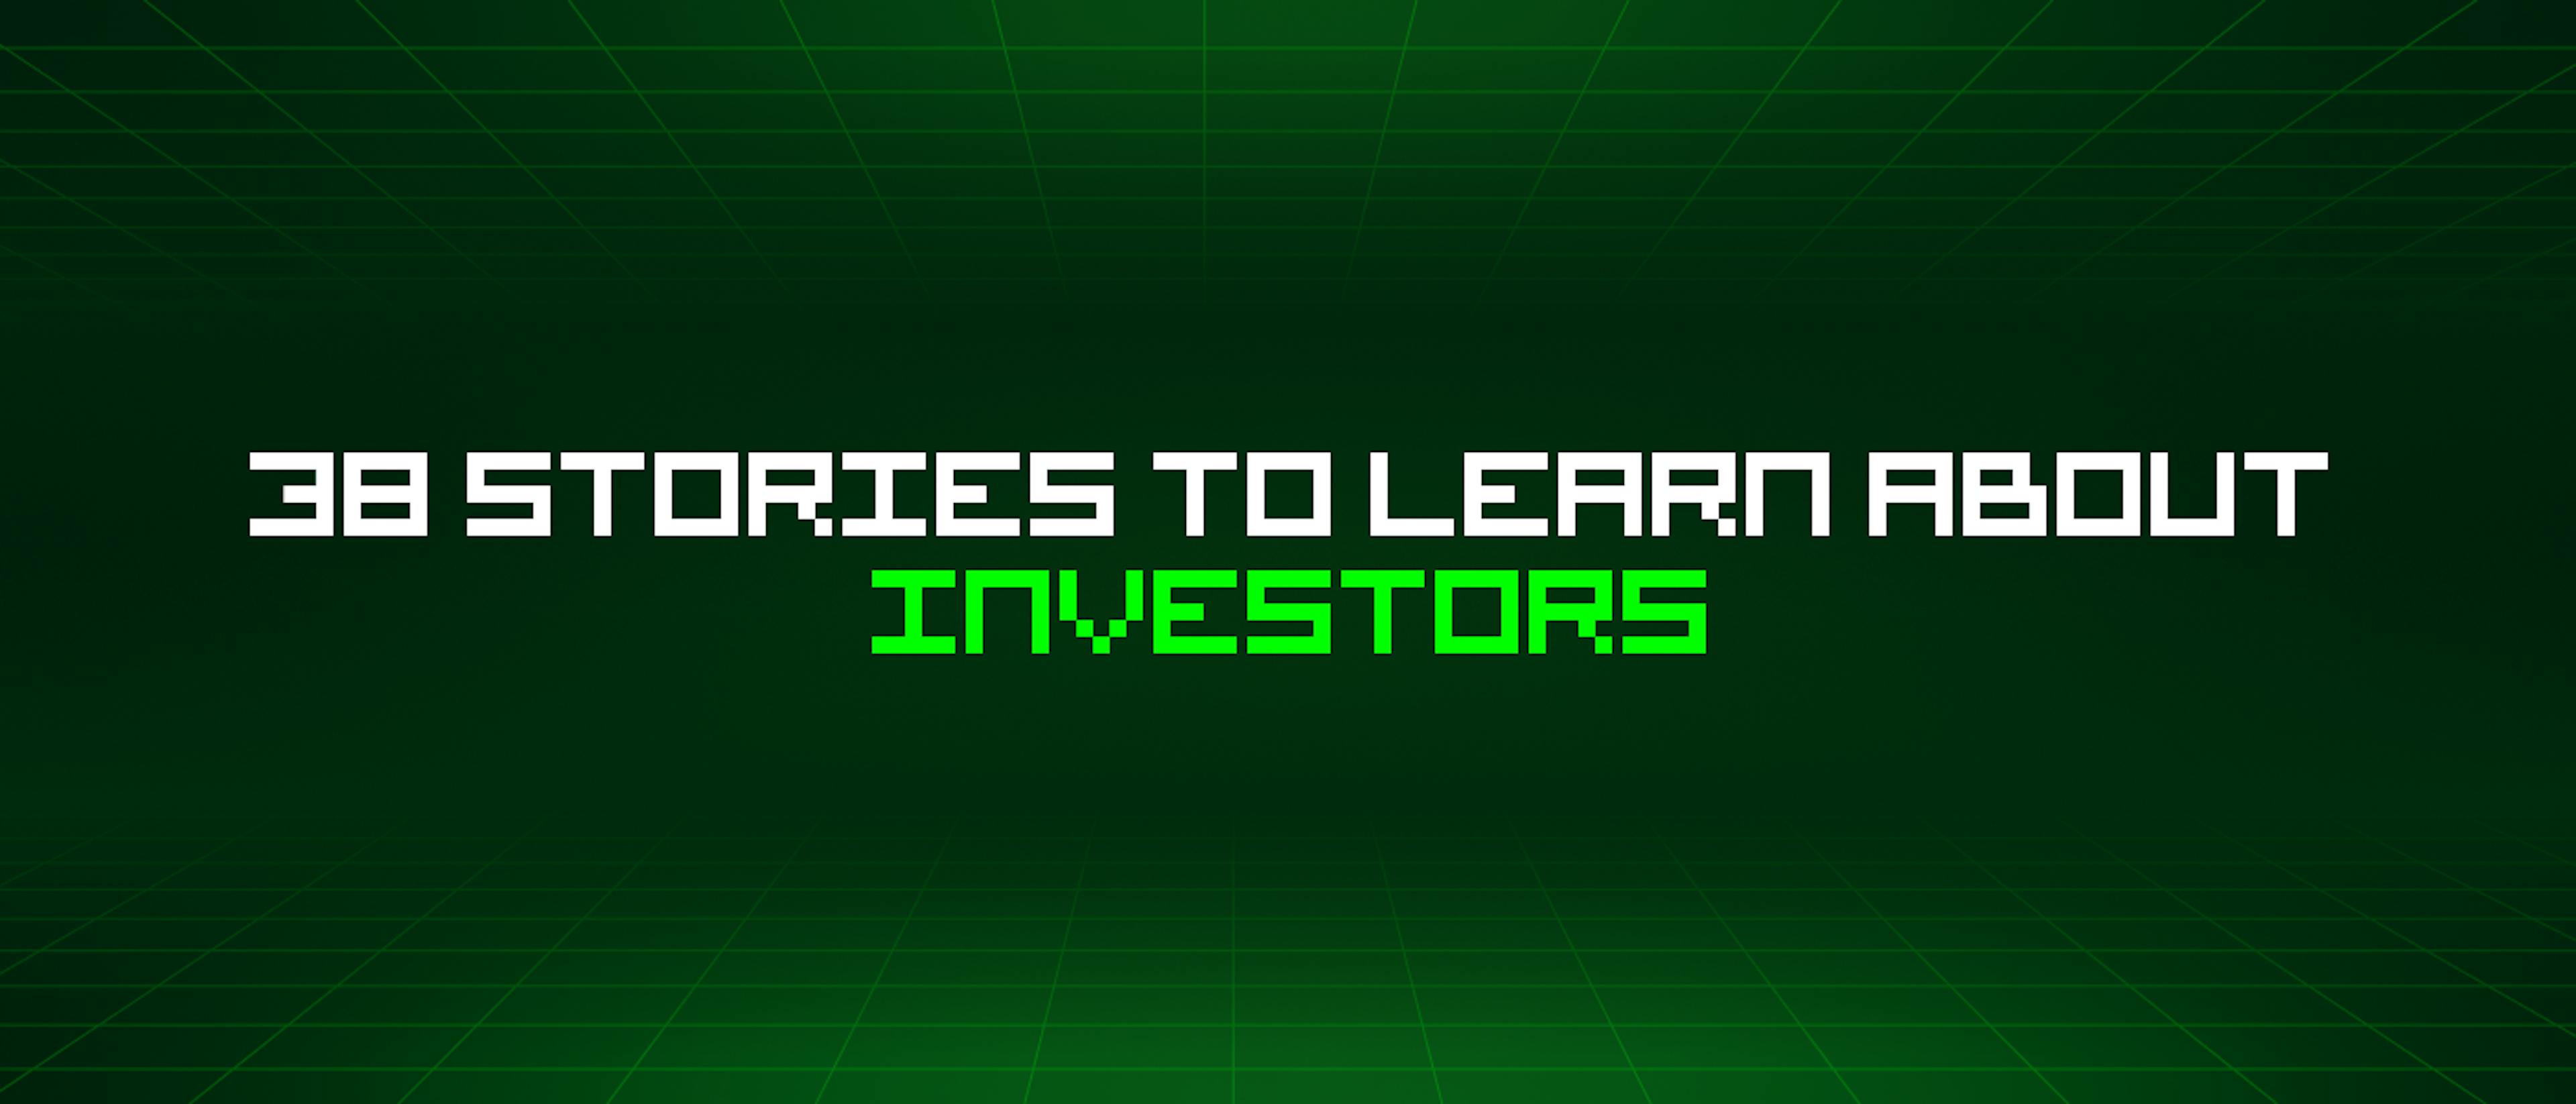 featured image - 38 Stories To Learn About Investors